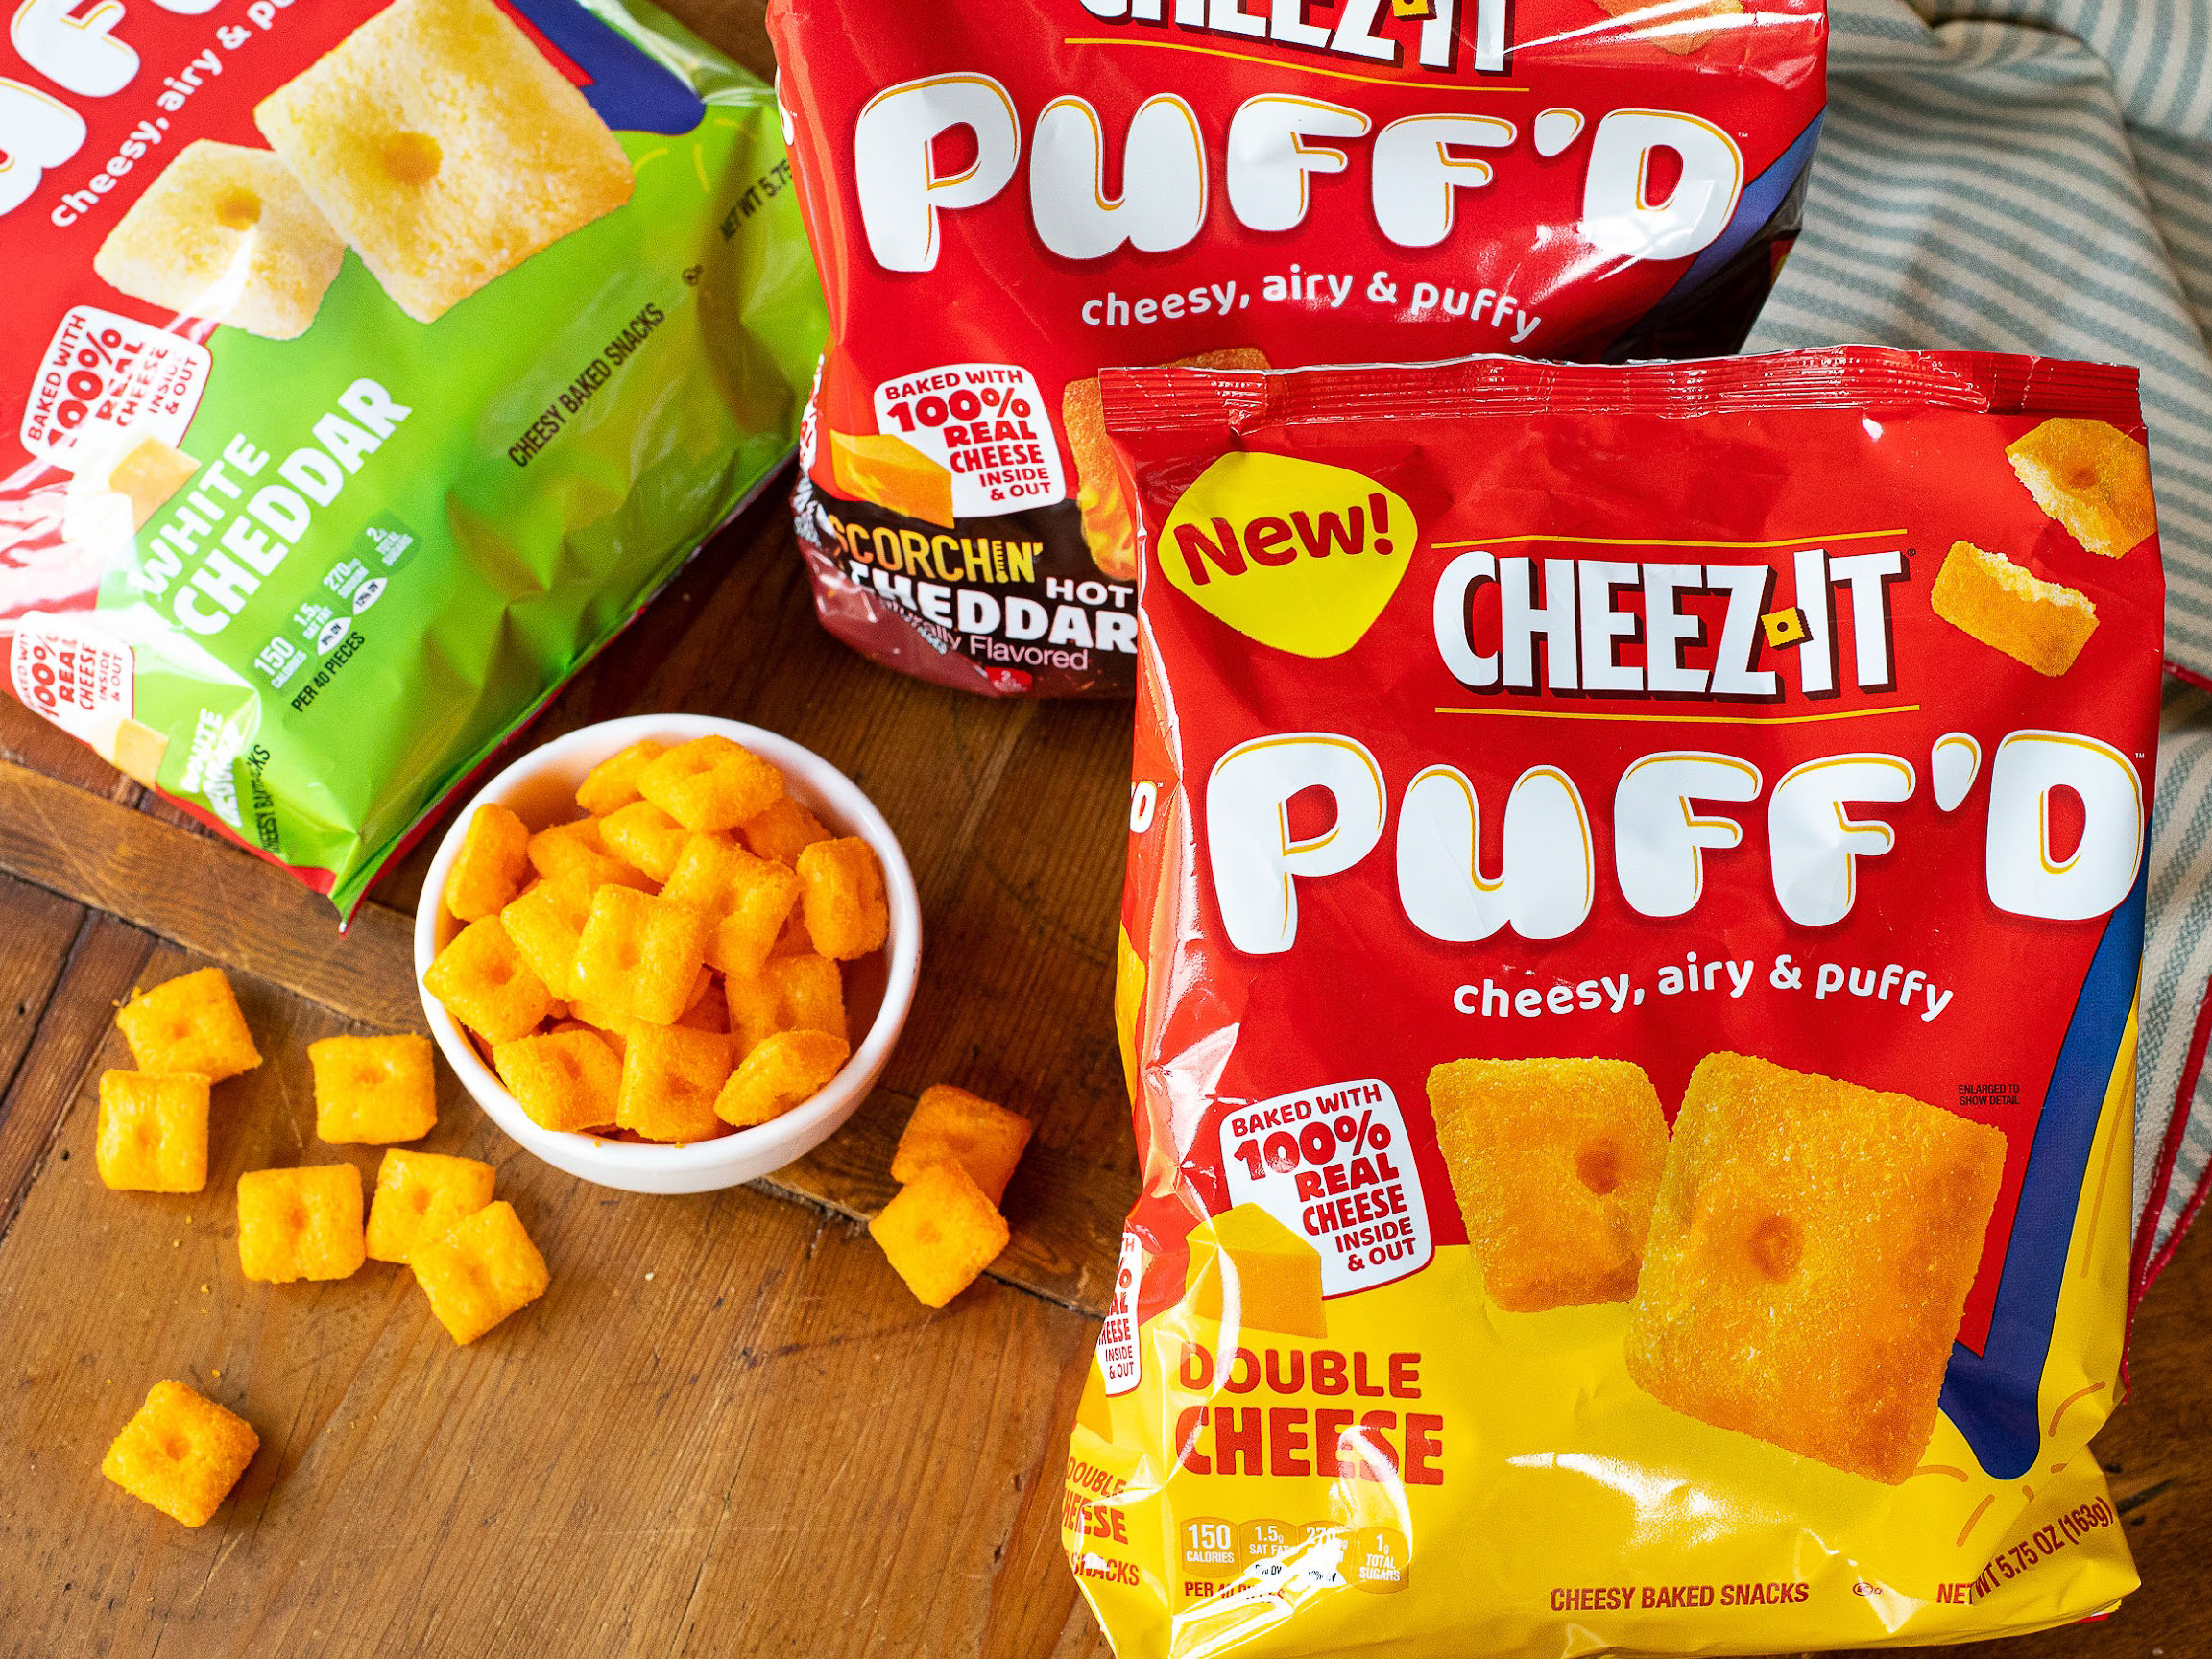 Delicious NEW Cheez-It Puff'd Snacks Are On Sale NOW At Publix on I Heart Publix